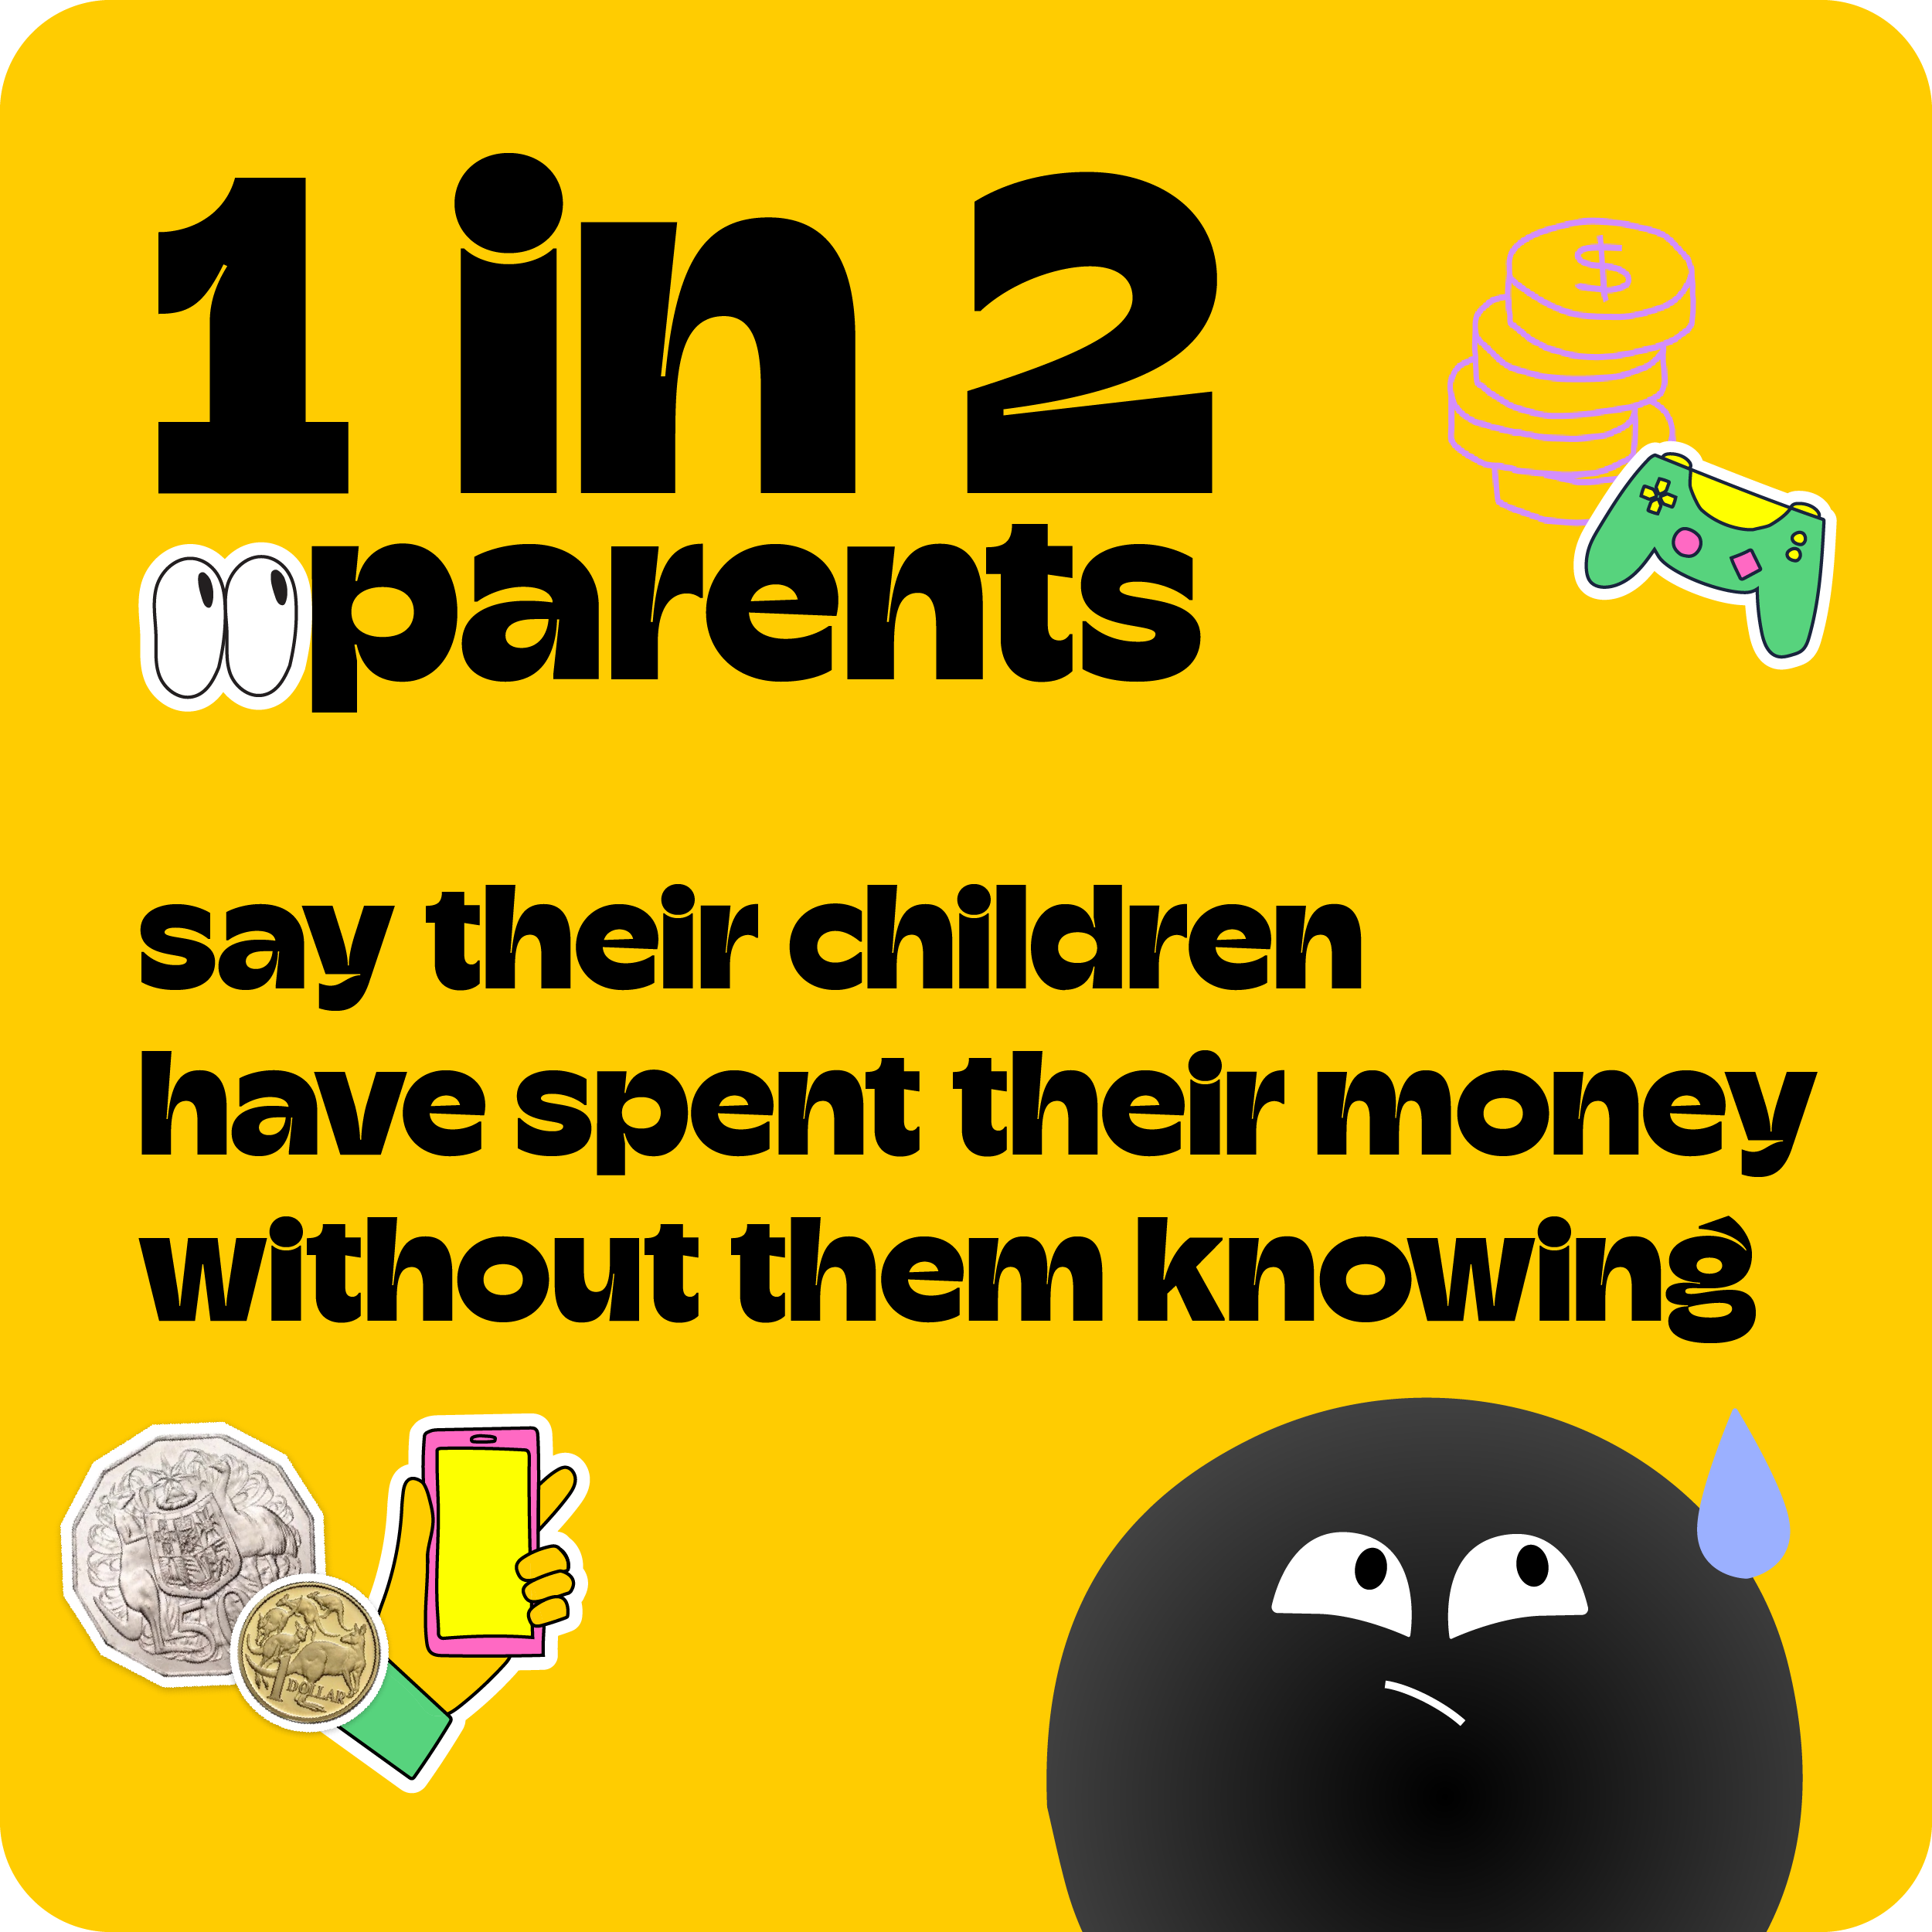 1 in 2 parents say their children have spent their money without them knowing